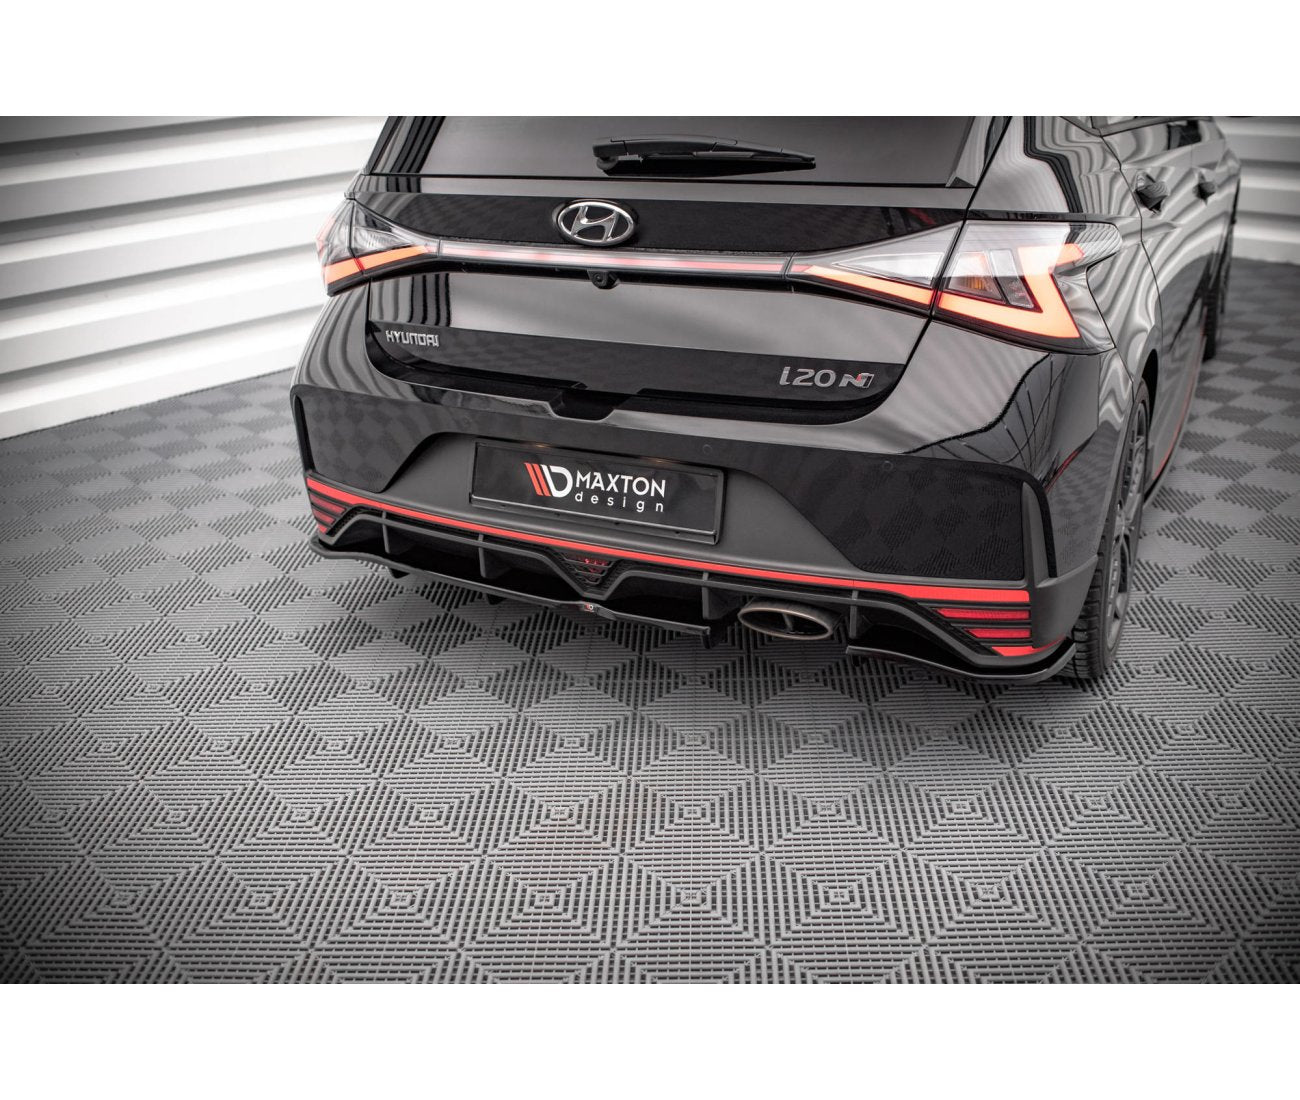 MAXTON DESIGN Middle Cup Diffusor Rear Approach DTM Look for Hyundai I20 N Mk3 